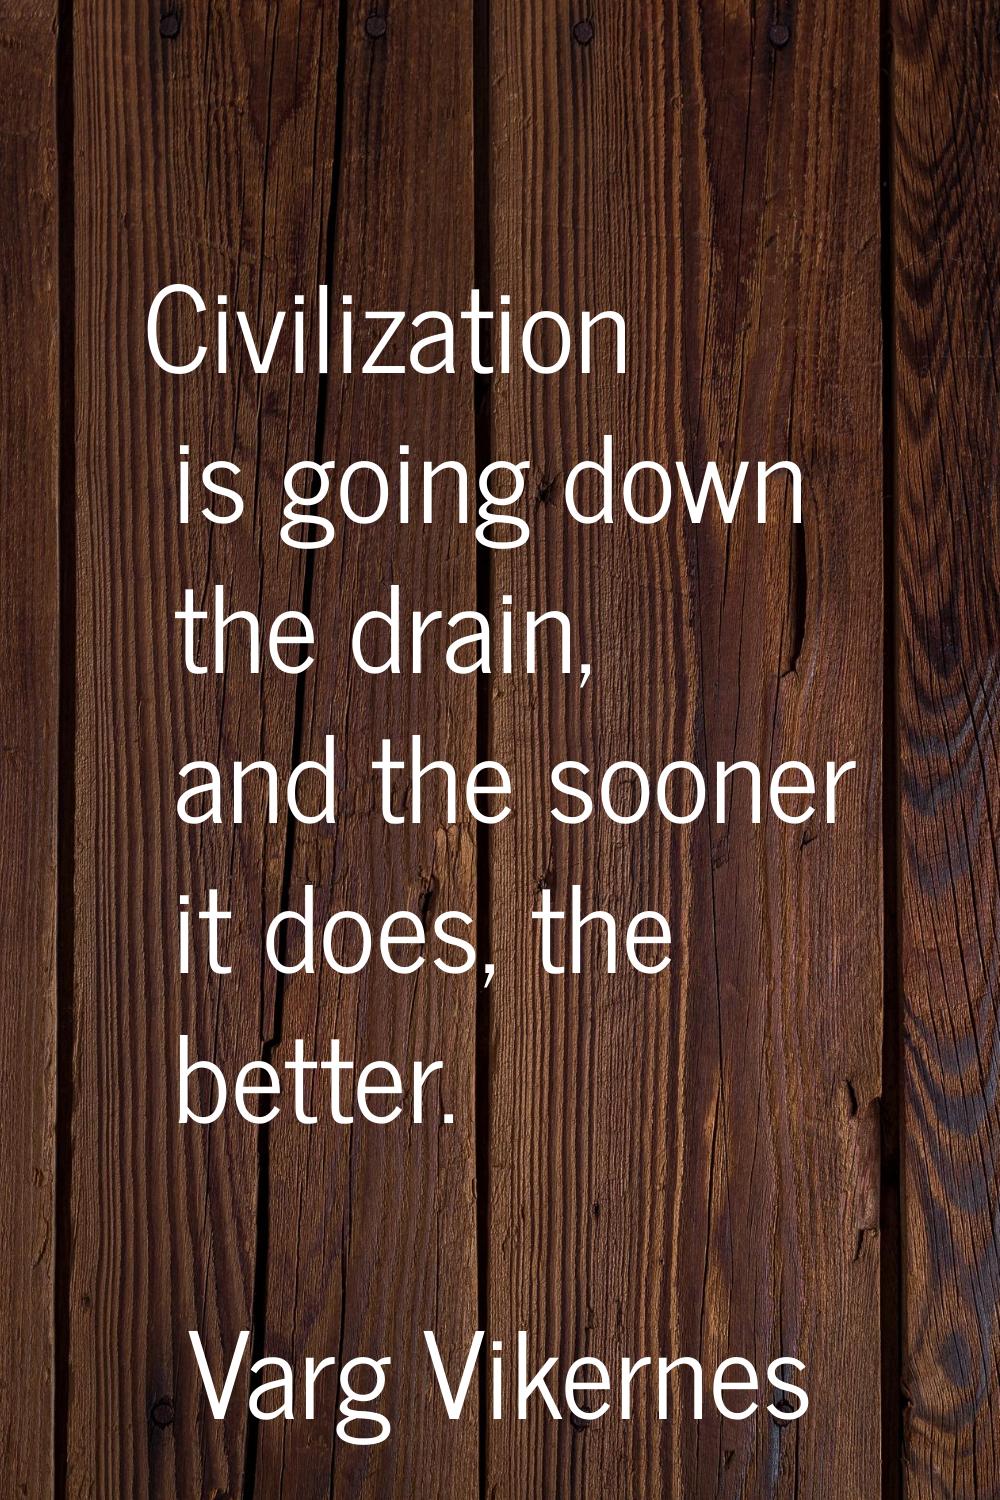 Civilization is going down the drain, and the sooner it does, the better.